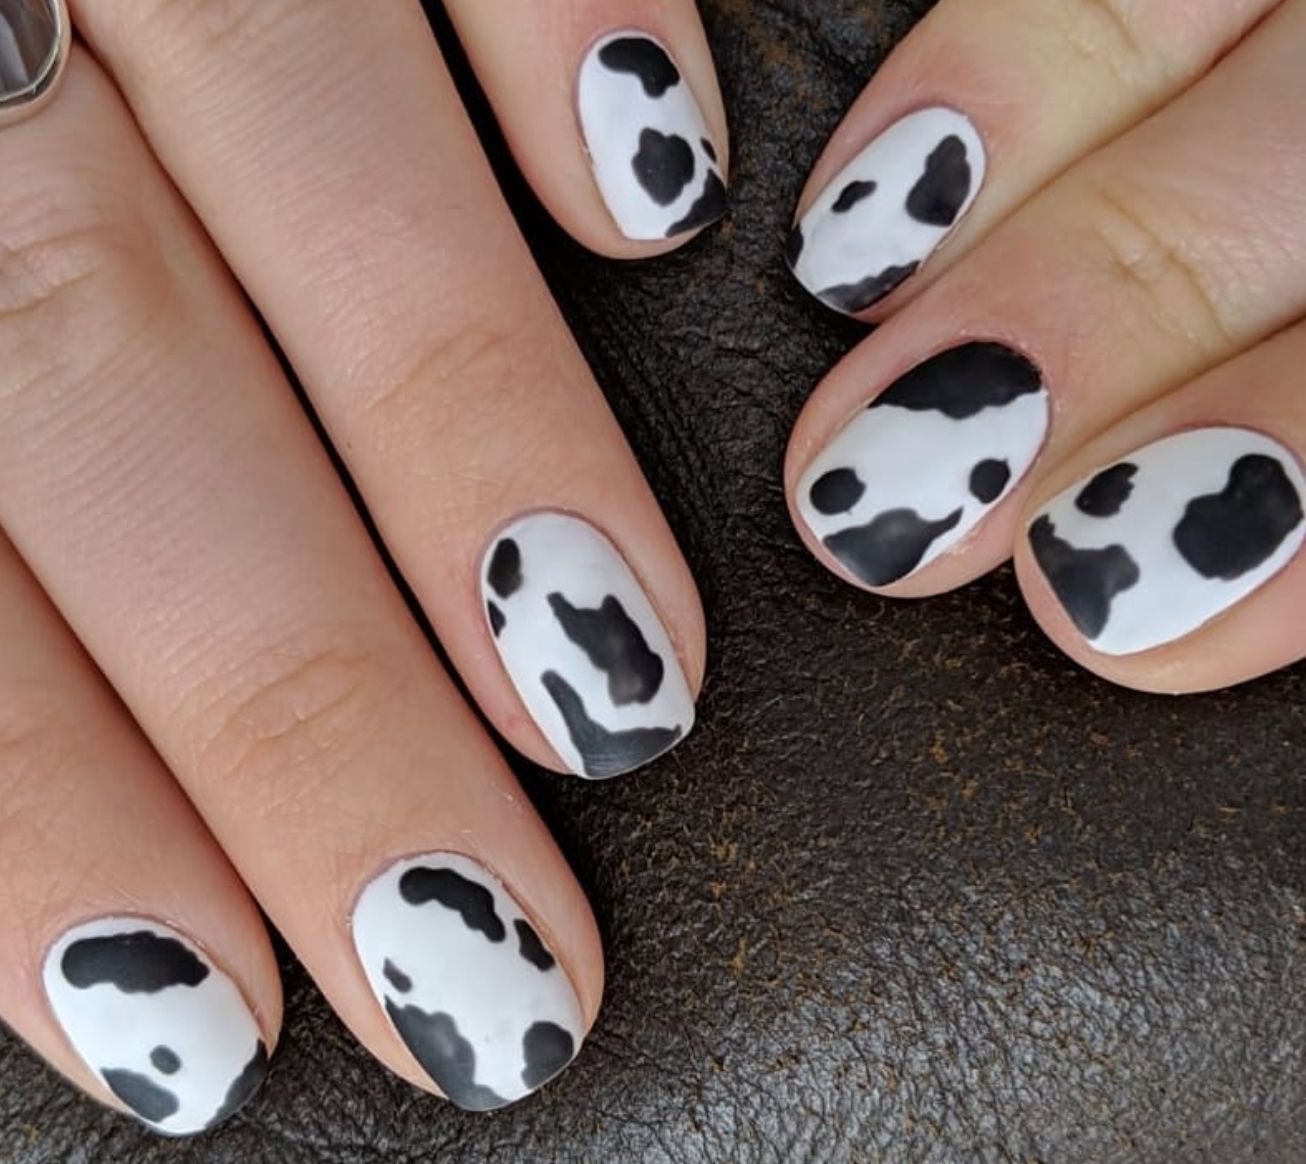 19 Nail Art Ideas That Are Totally Easy Enough to Do at Home